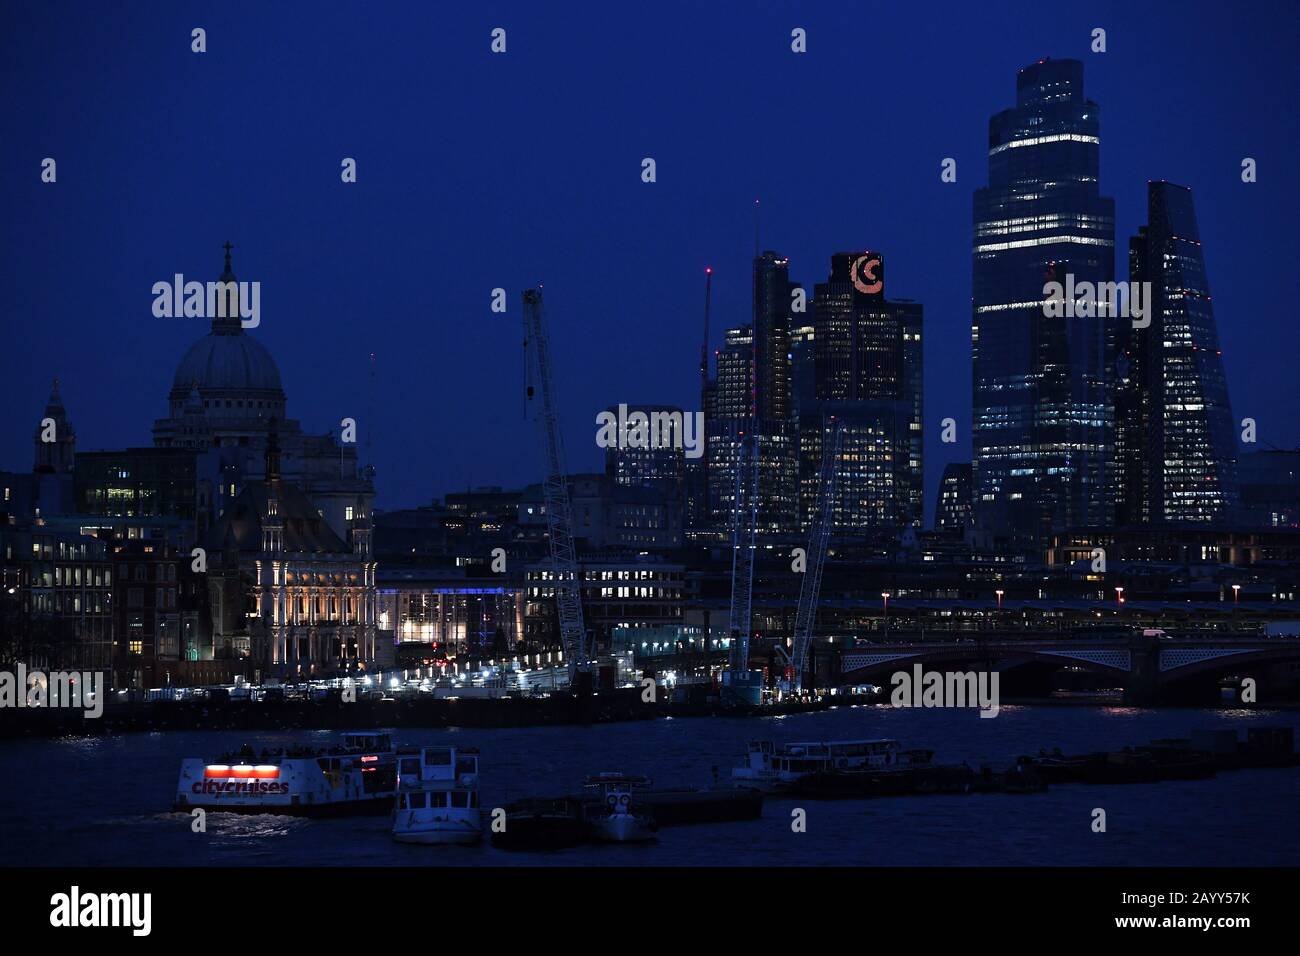 A view of the London Skyline taken from Waterloo Bridge, showing St Paul's Cathedral, Tower 42, 22 Bishopsgate, and the Leadenhall Building (also known as the Cheesegrater). PA Photo. Picture date: Monday February 17, 2020. Photo credit should read: Kirsty O'Connor/PA Wire Stock Photo